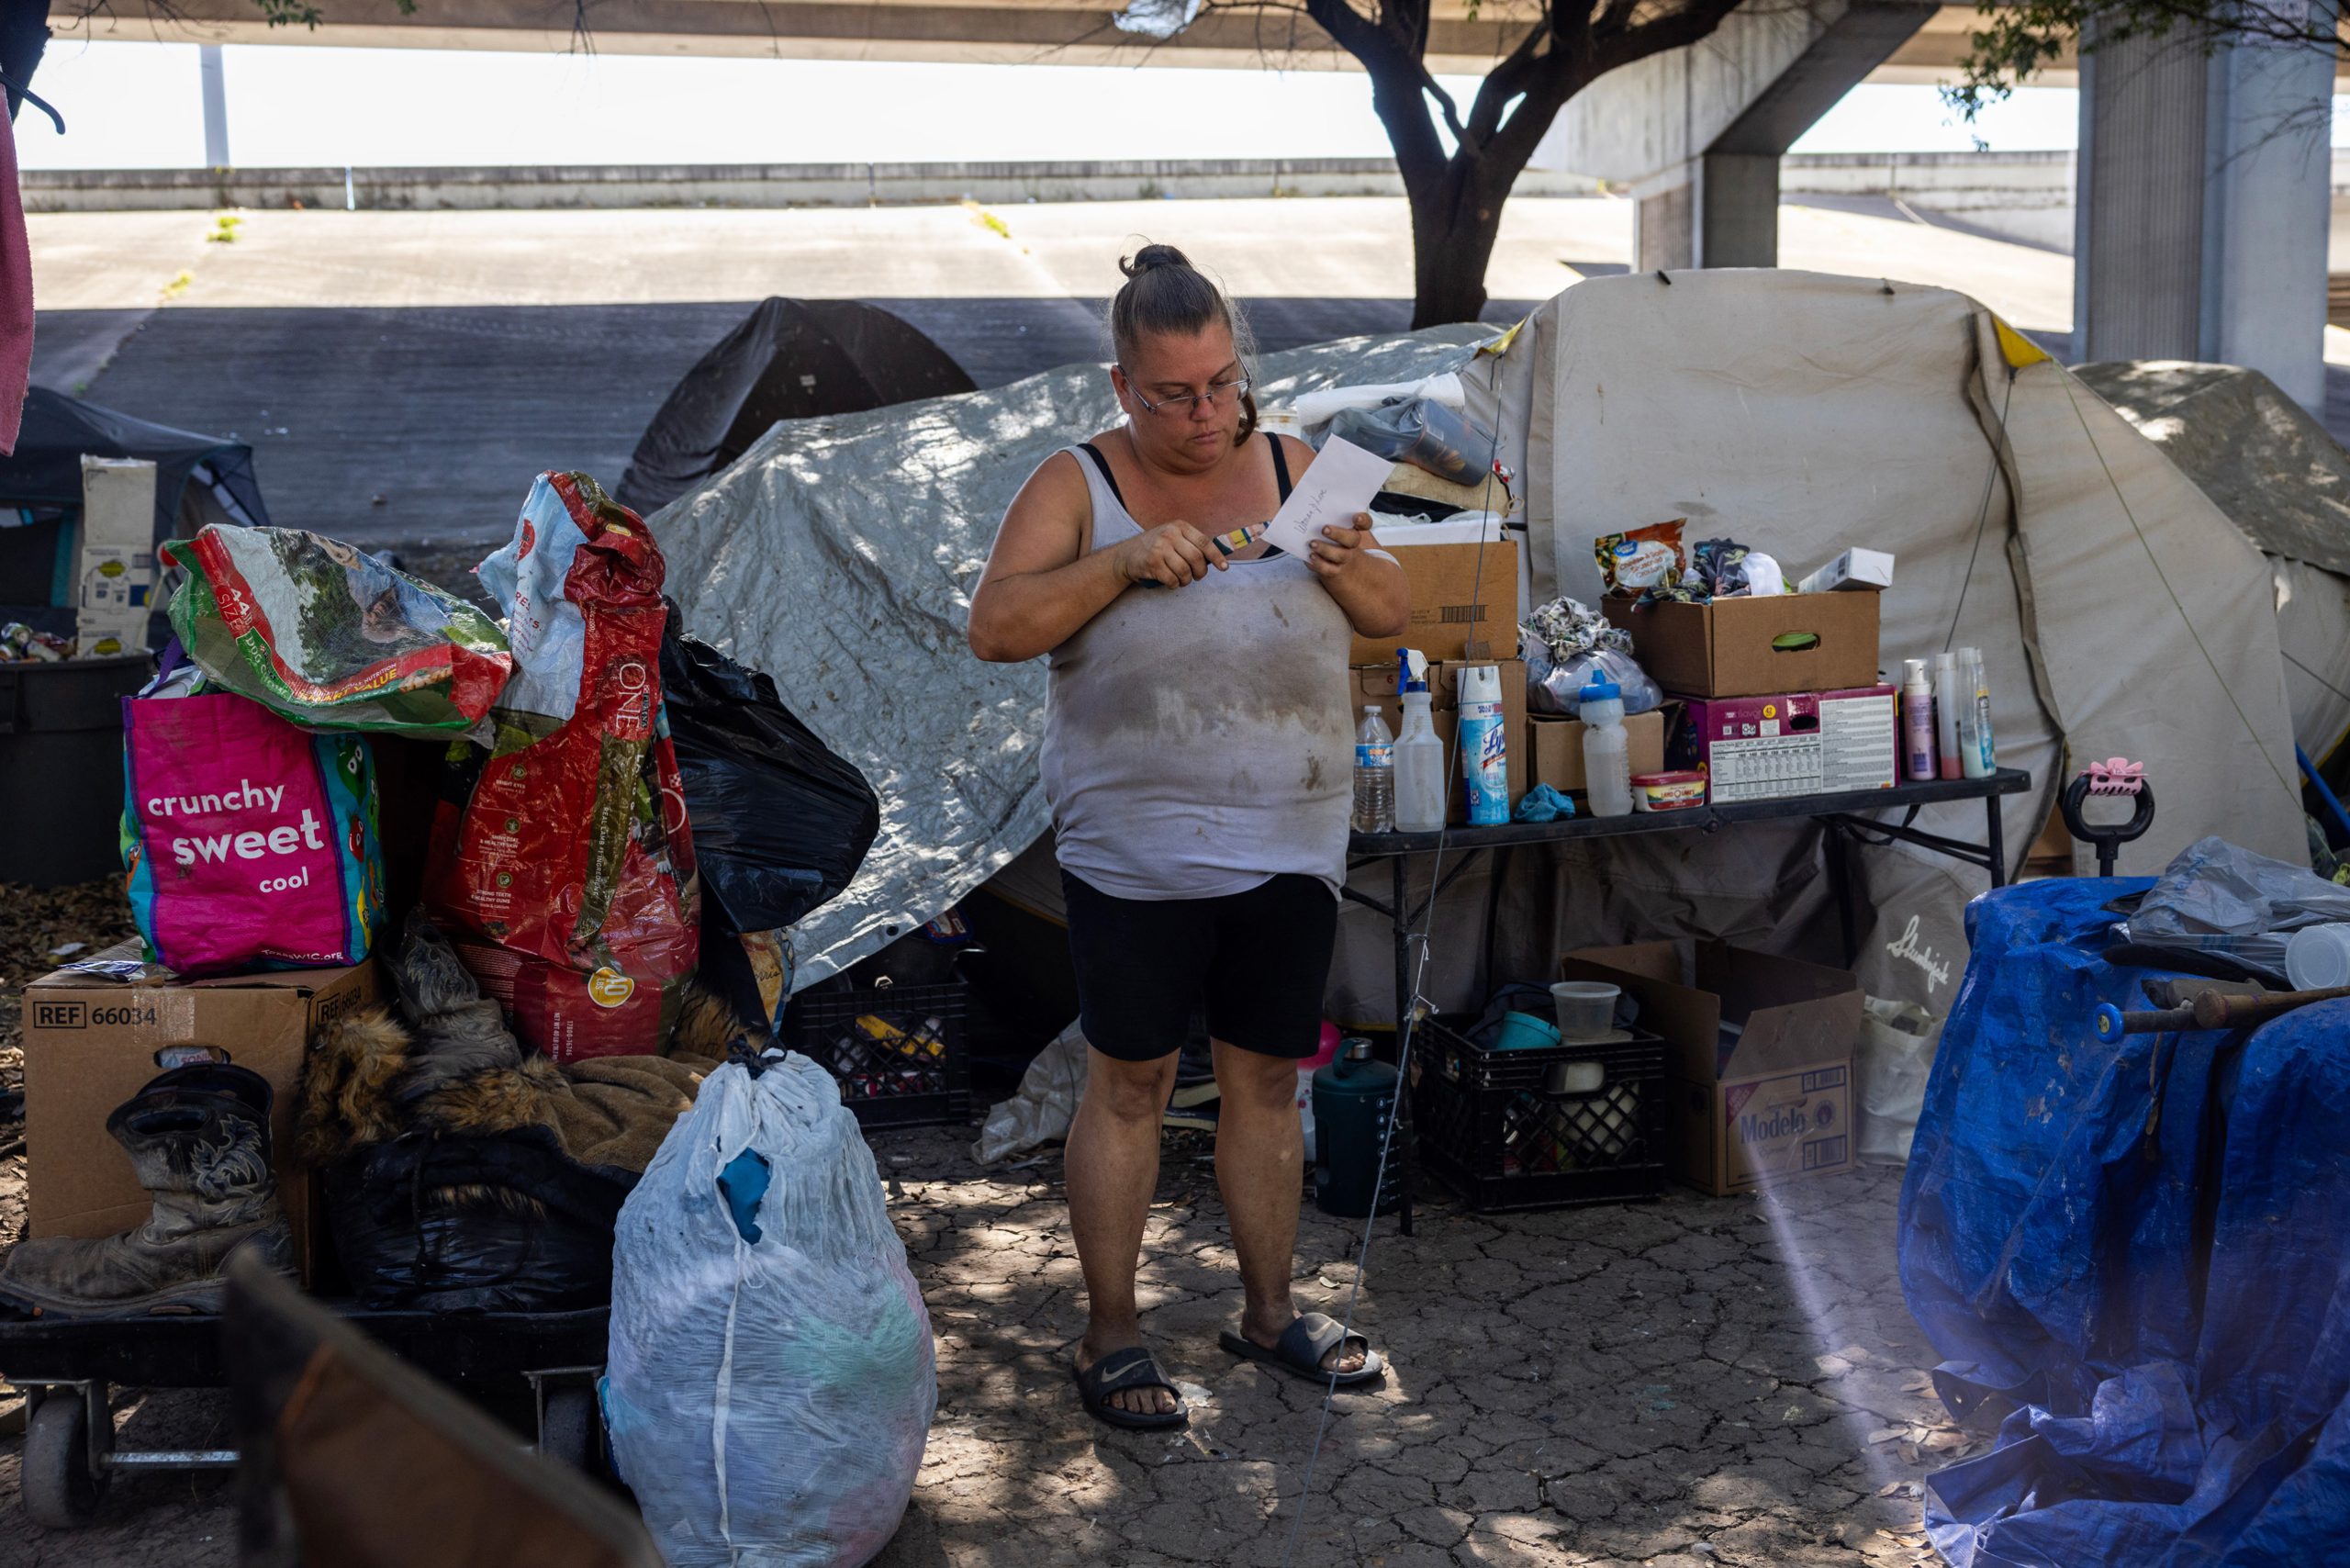 Sara Smith looks at her mail at an encampment under an overpass